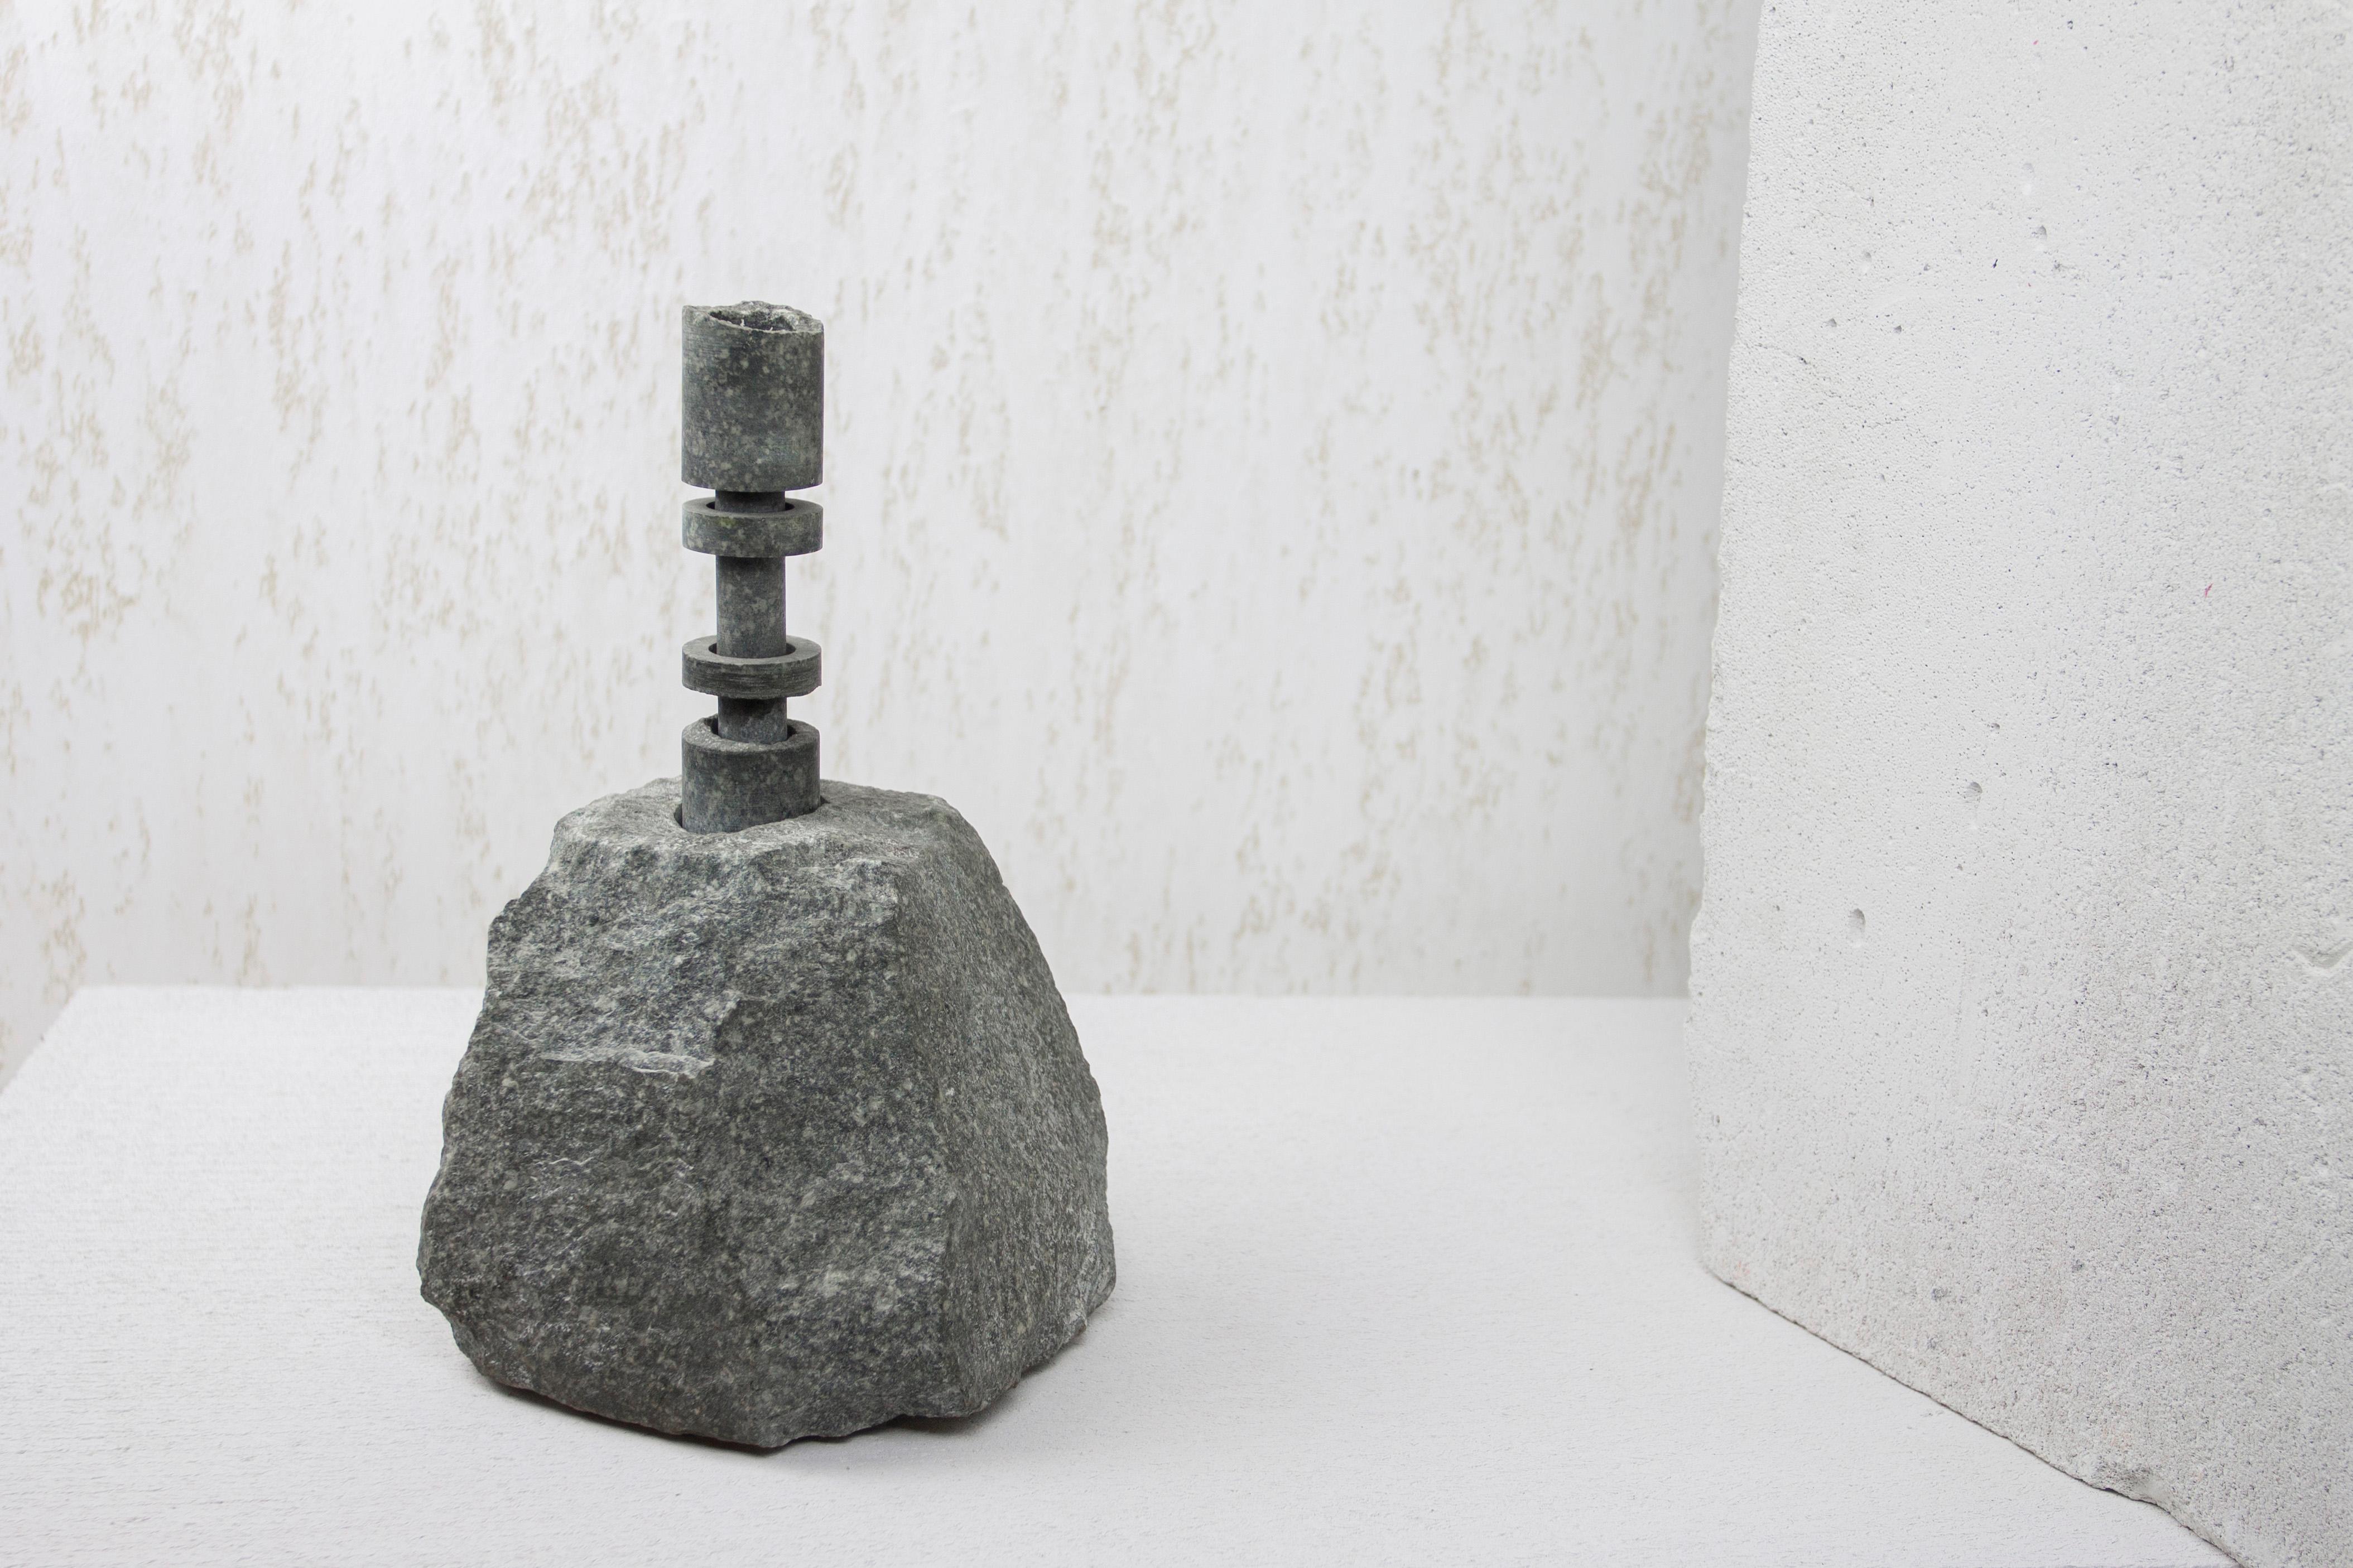 Porfier Abra Candelabra by Studio DO
Dimensions: D 14 x W 13 x H 25.5 cm
Materials: Stone, aluminum.
5.7 kg.

Stone and fire are connected in an ageless bond. A sparkle created by clashing two stones with each other has been igniting fire over